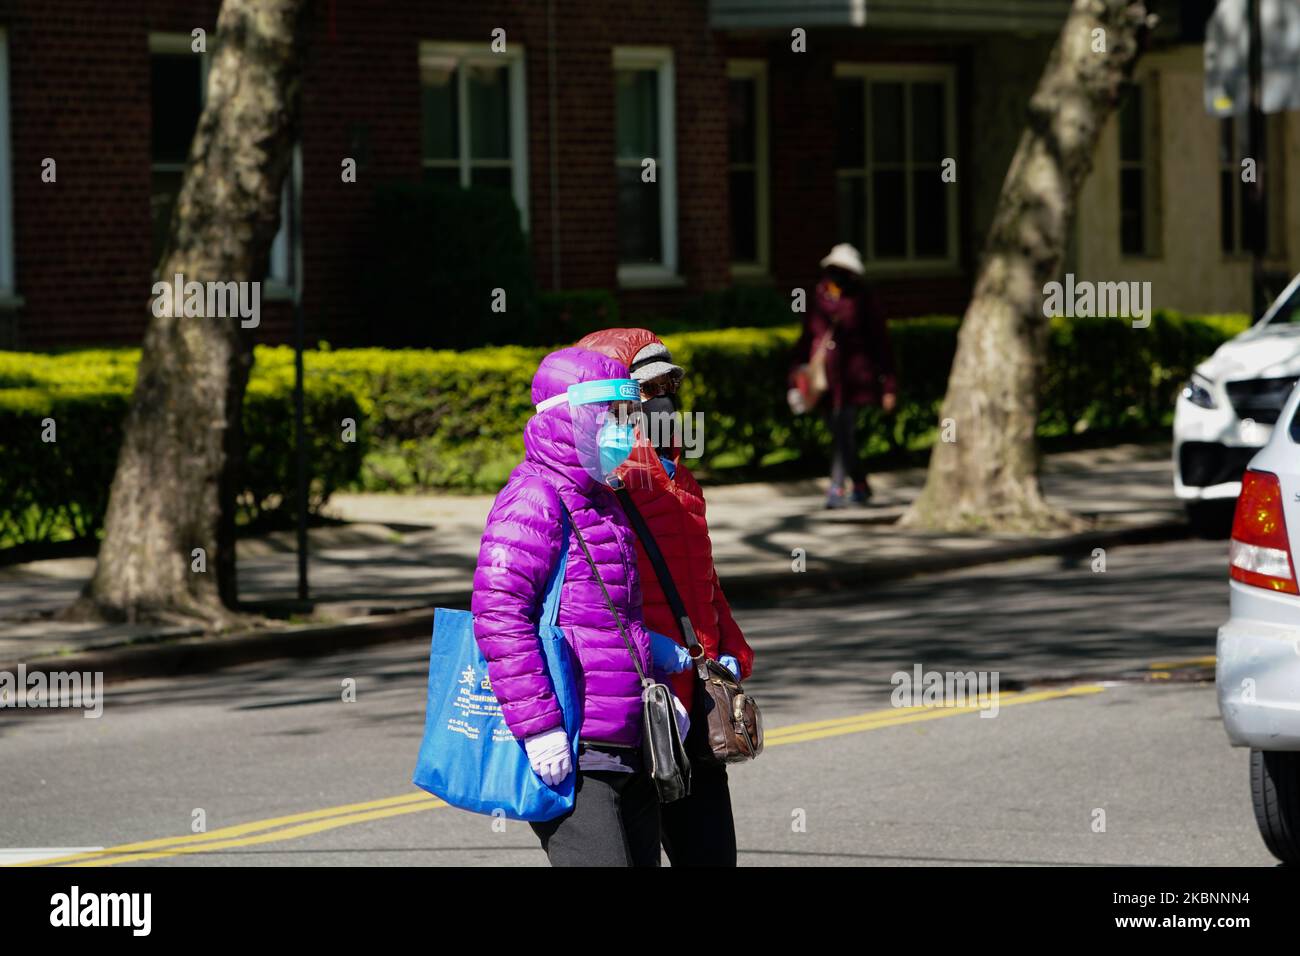 A view of people wearing face shields and masks during the coronavirus pandemic on May 12, 2020 in Queens borough of New York City. COVID-19 has spread to most countries around the world, claiming over 270,000 lives with over 3.9 million infections reported. (Photo by John Nacion/NurPhoto) Stock Photo